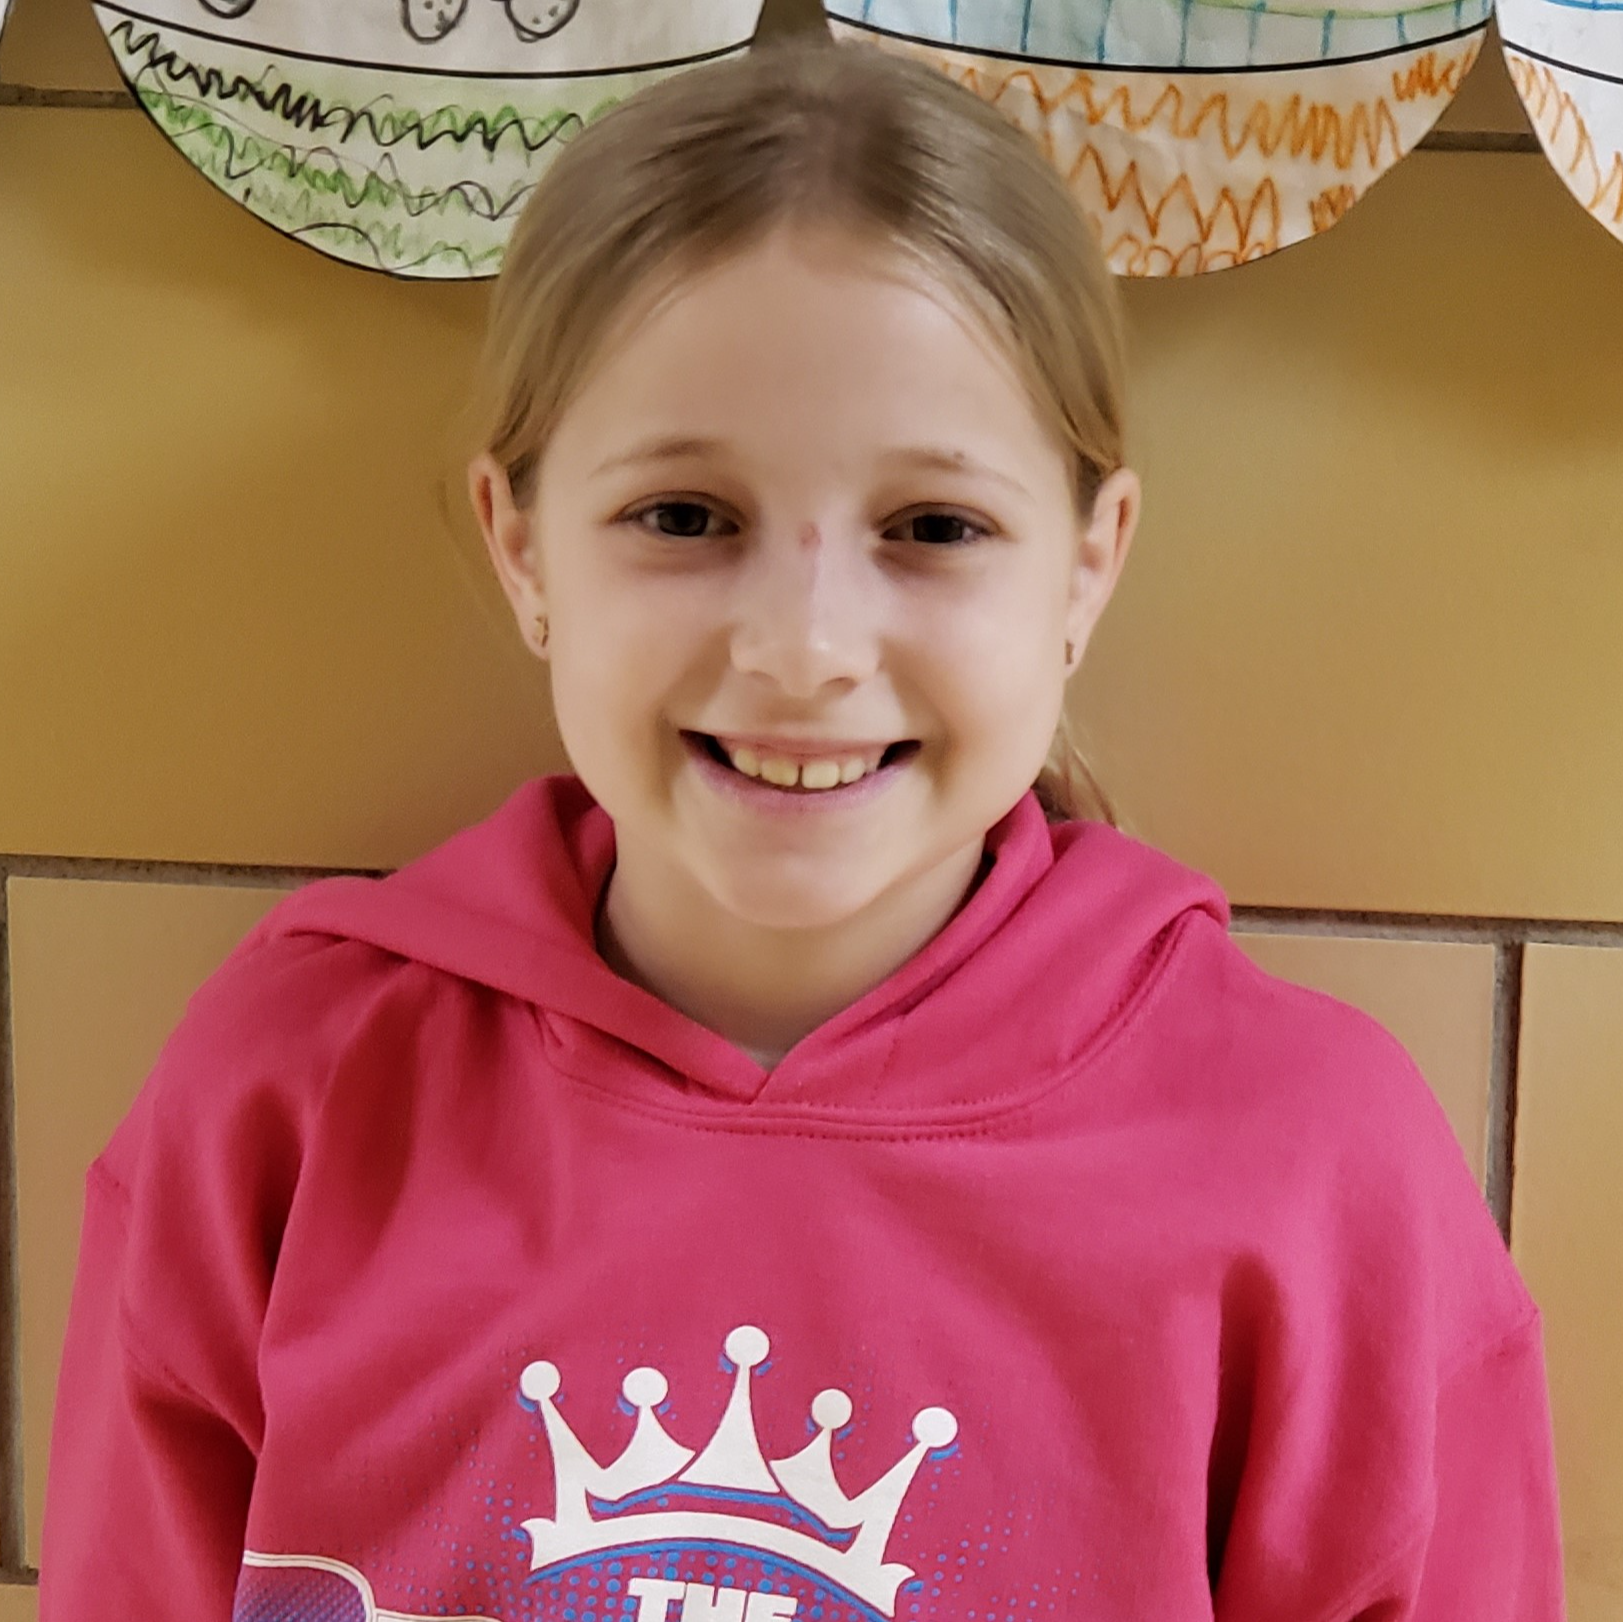 smiling girl with blonde hair pulled back wearing a pink hooded sweatshirt with a white crown on it